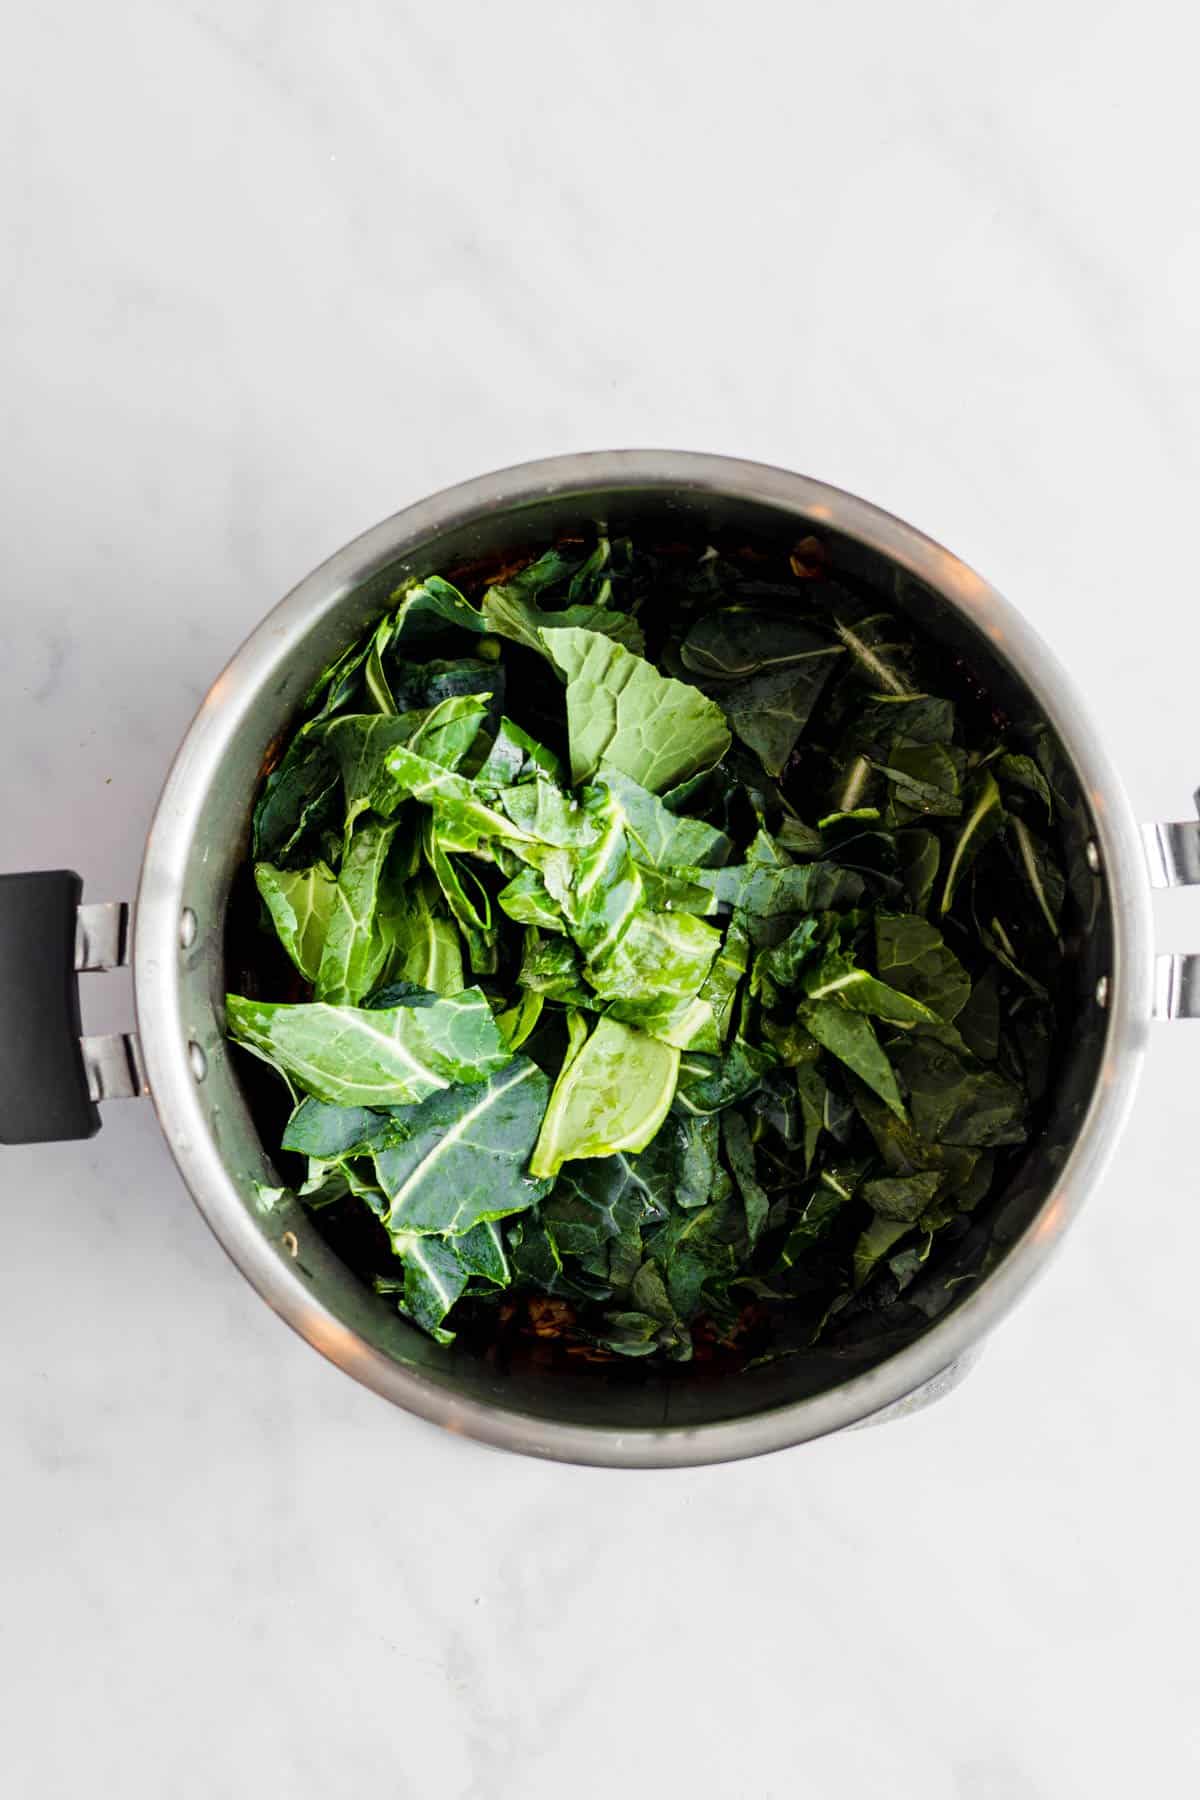 Chopped collard greens added to the Instant Pot.